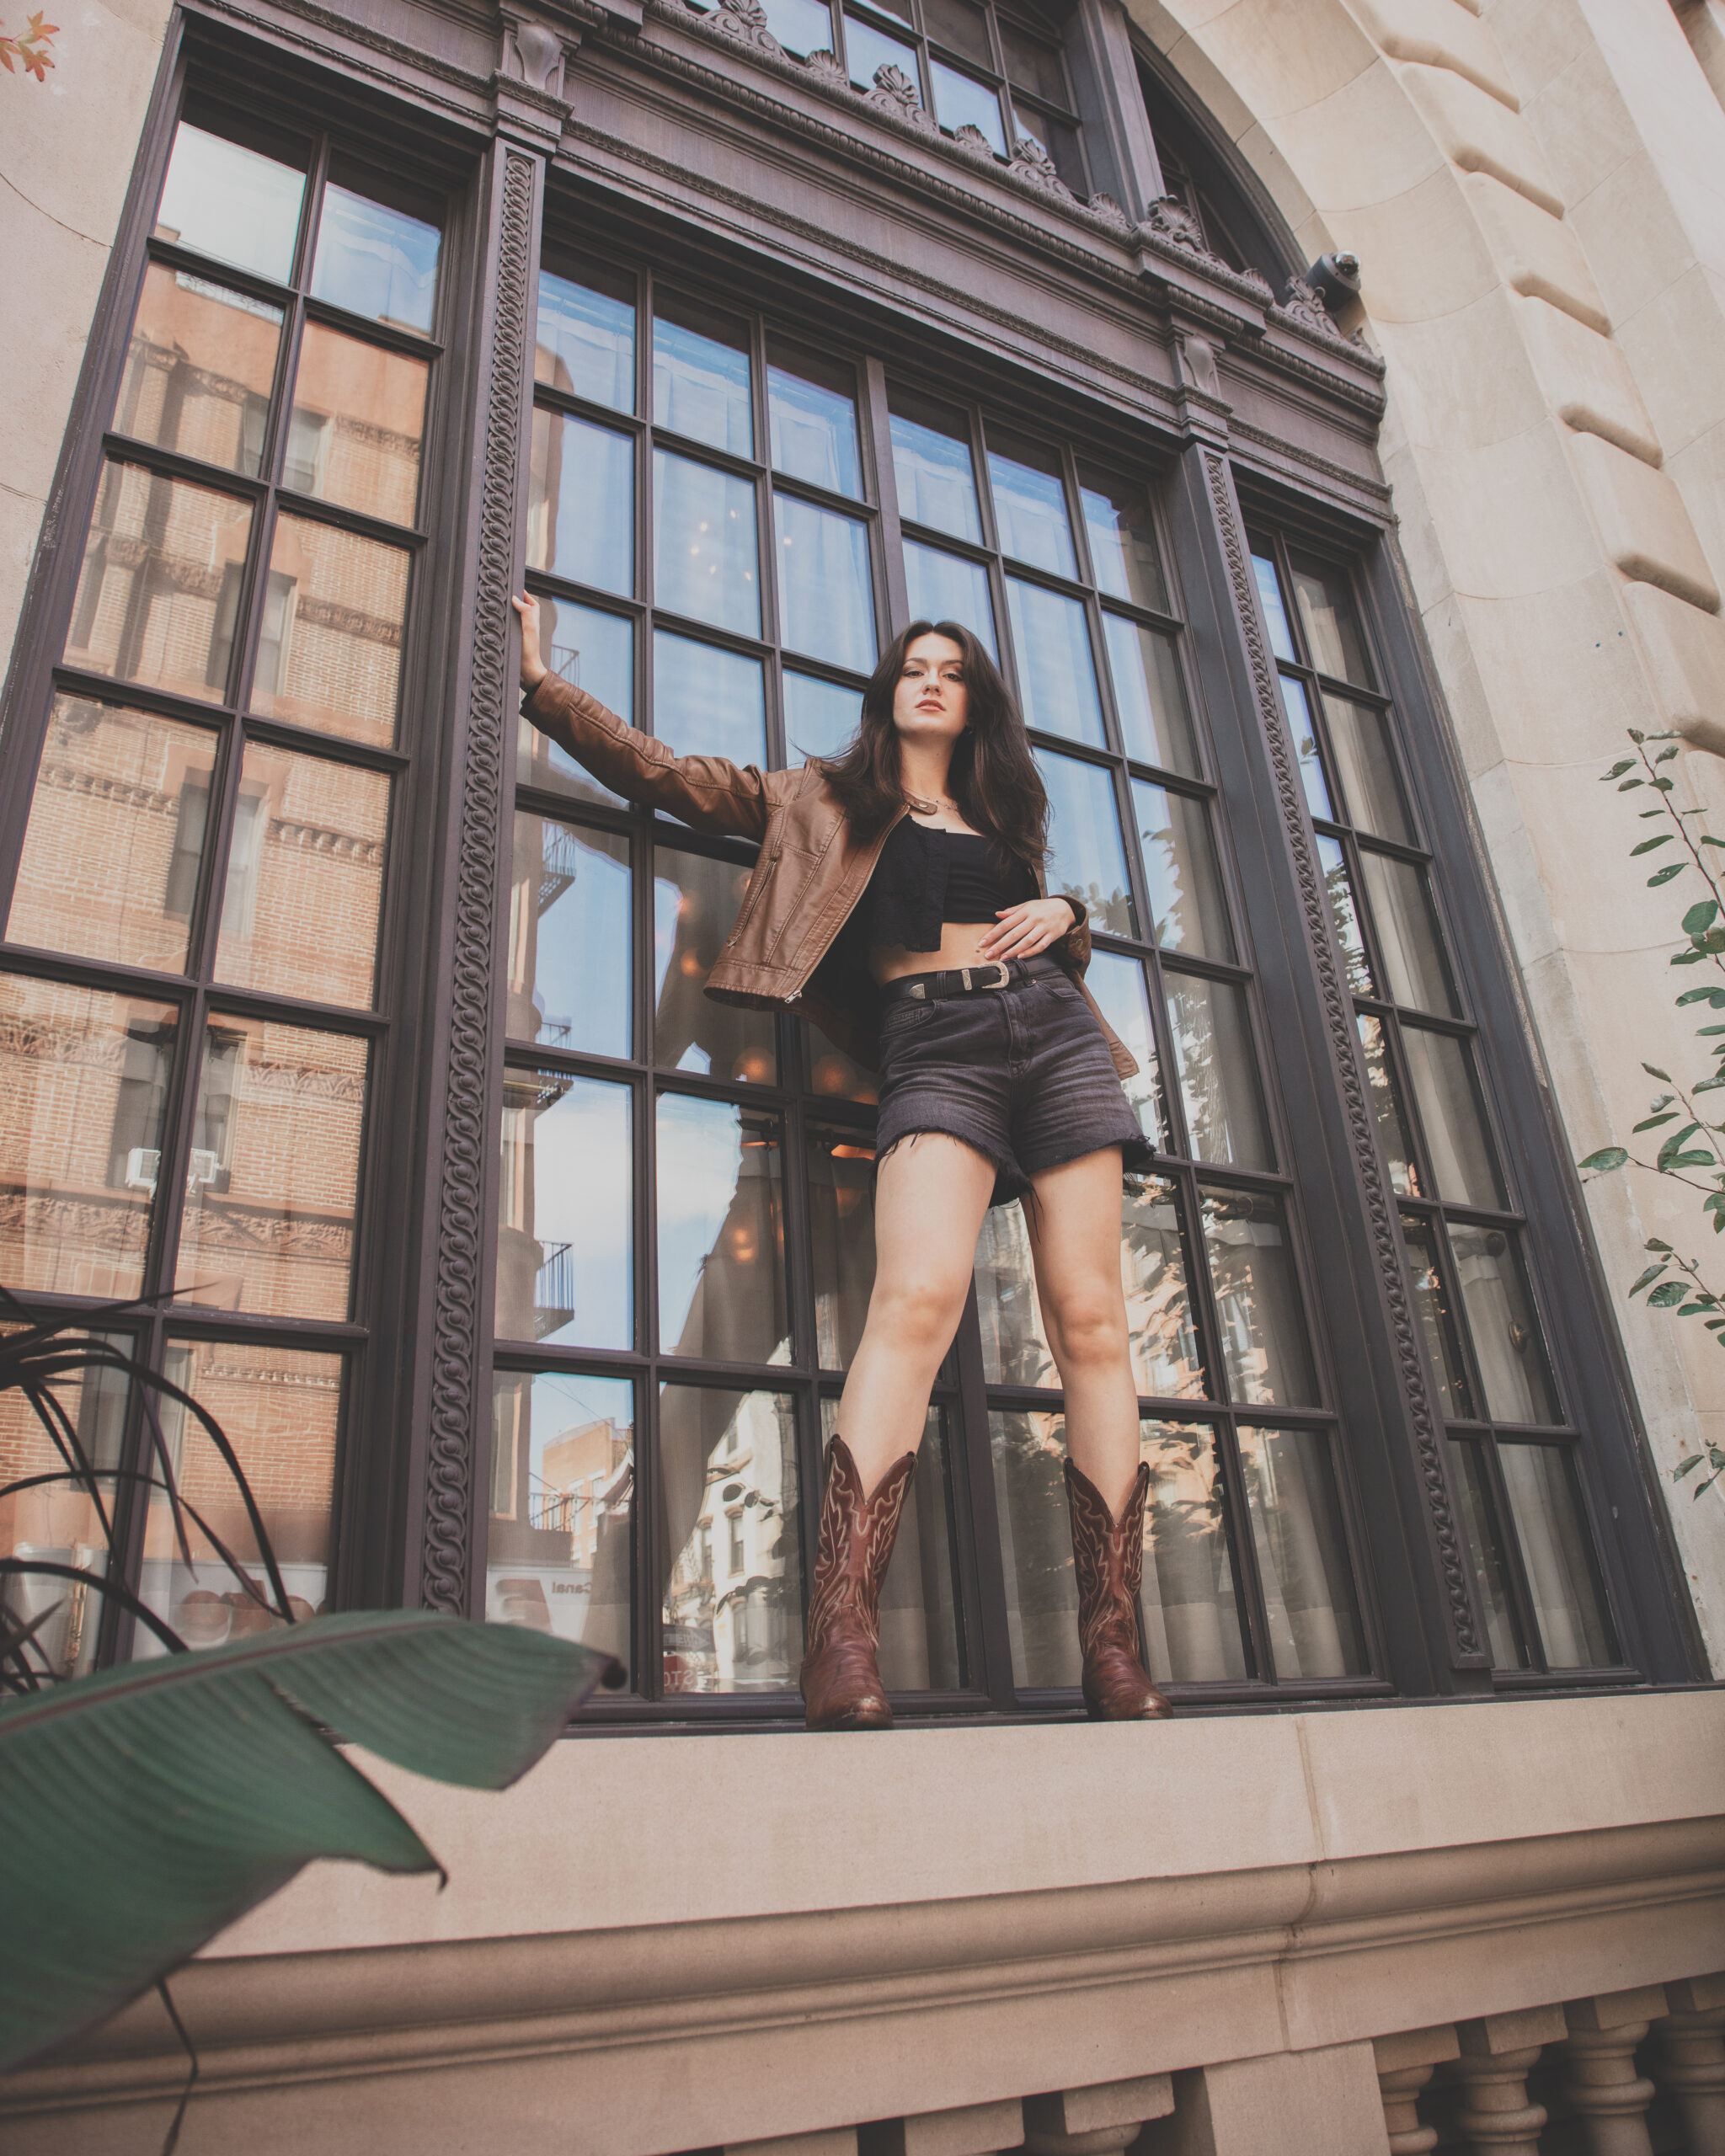 The image depicts a woman standing in a very large window frame with her left hand extended to the side of the frame. She has dark hair and is wearing a brown jacket, black top, dark shorts, and brown cowboy boots. The window reflects the street and buildings opposite. There is a large leaf in the foreground on the left side of the frame, adding a touch of greenery to the urban setting